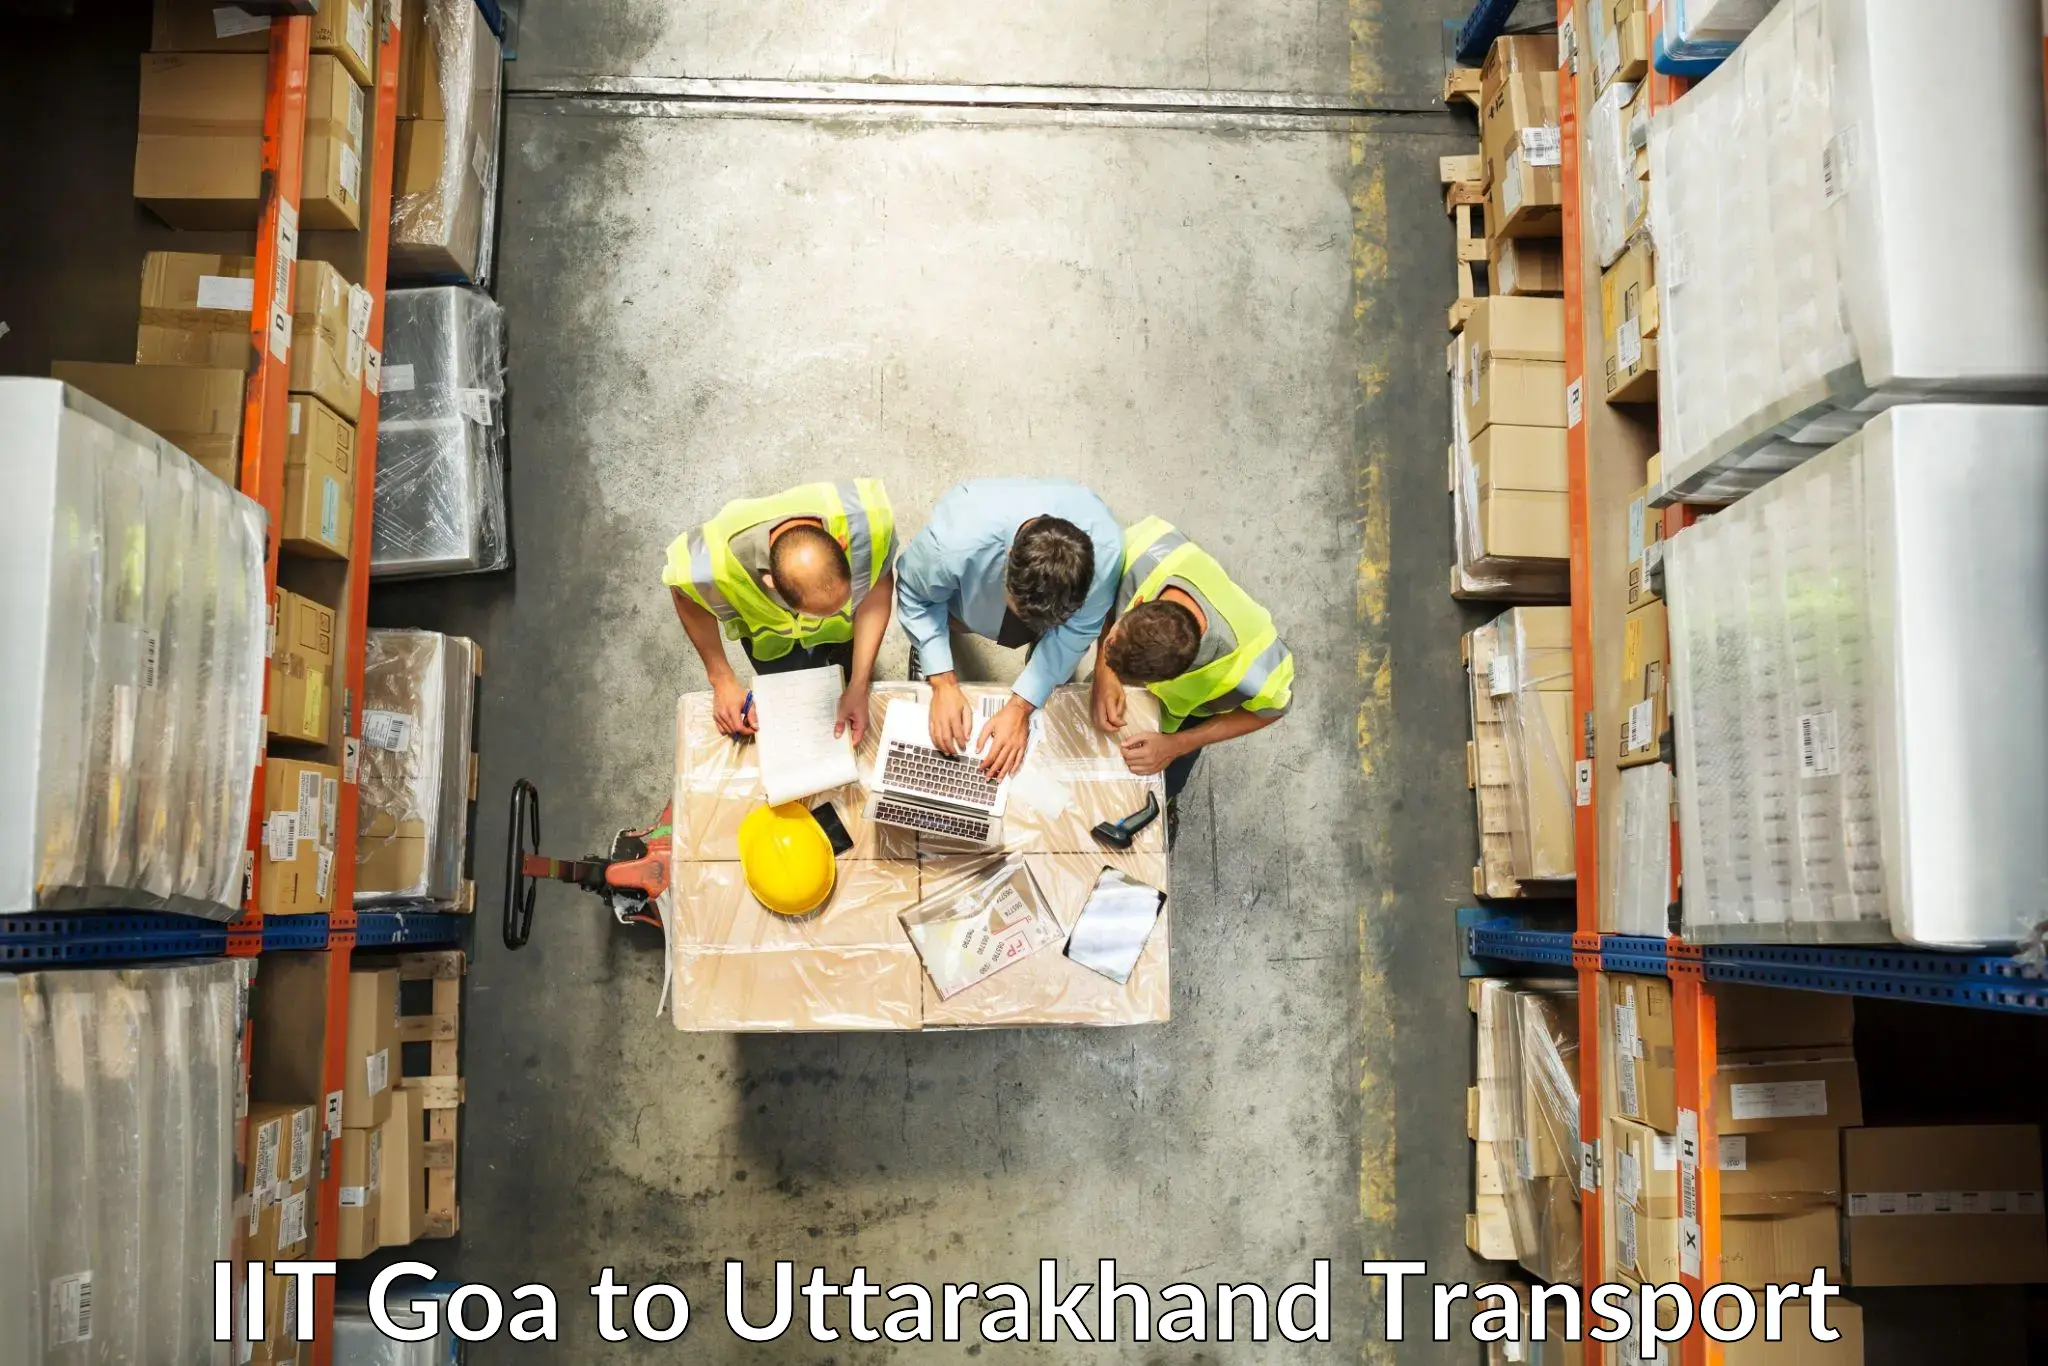 Container transport service IIT Goa to Lansdowne